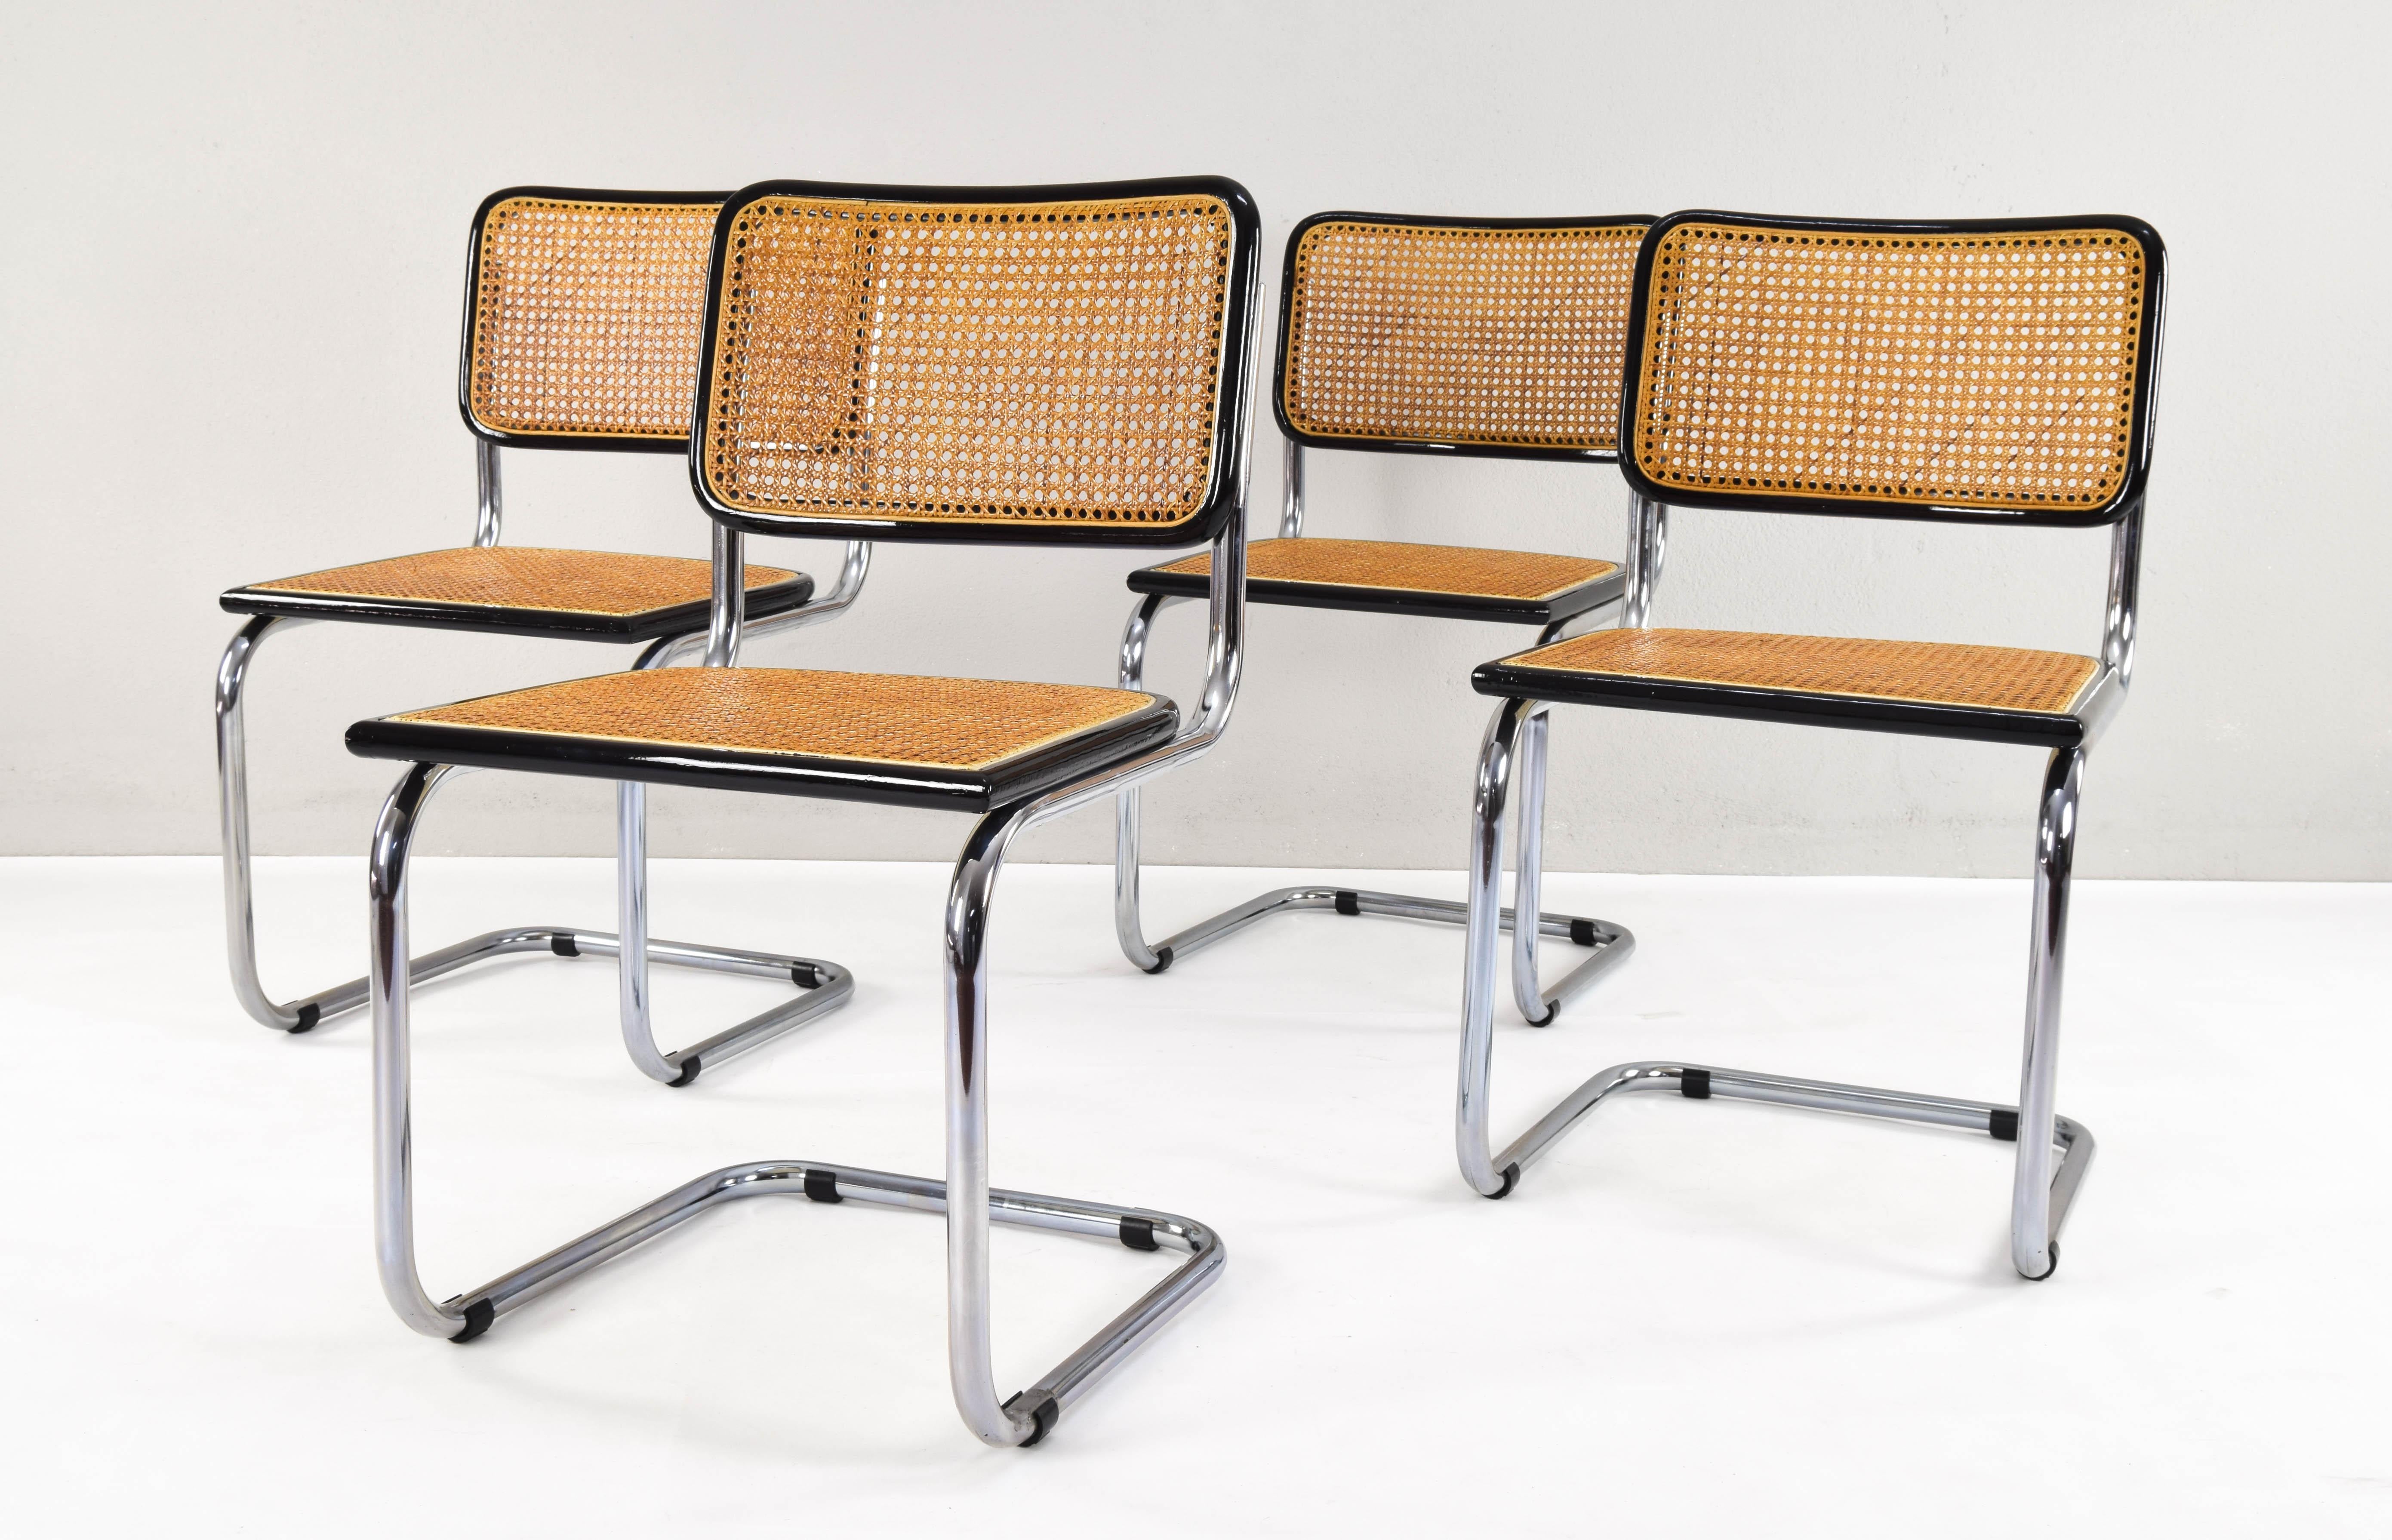 Set of four Cesca chairs, model B32, manufactured in Italy in the 1970s. Chrome tubular structure, beechwood frames lacquered in black and Viennese natural grid.

Only slight flaw in the chrome of the base of two of the chairs detailed in images.